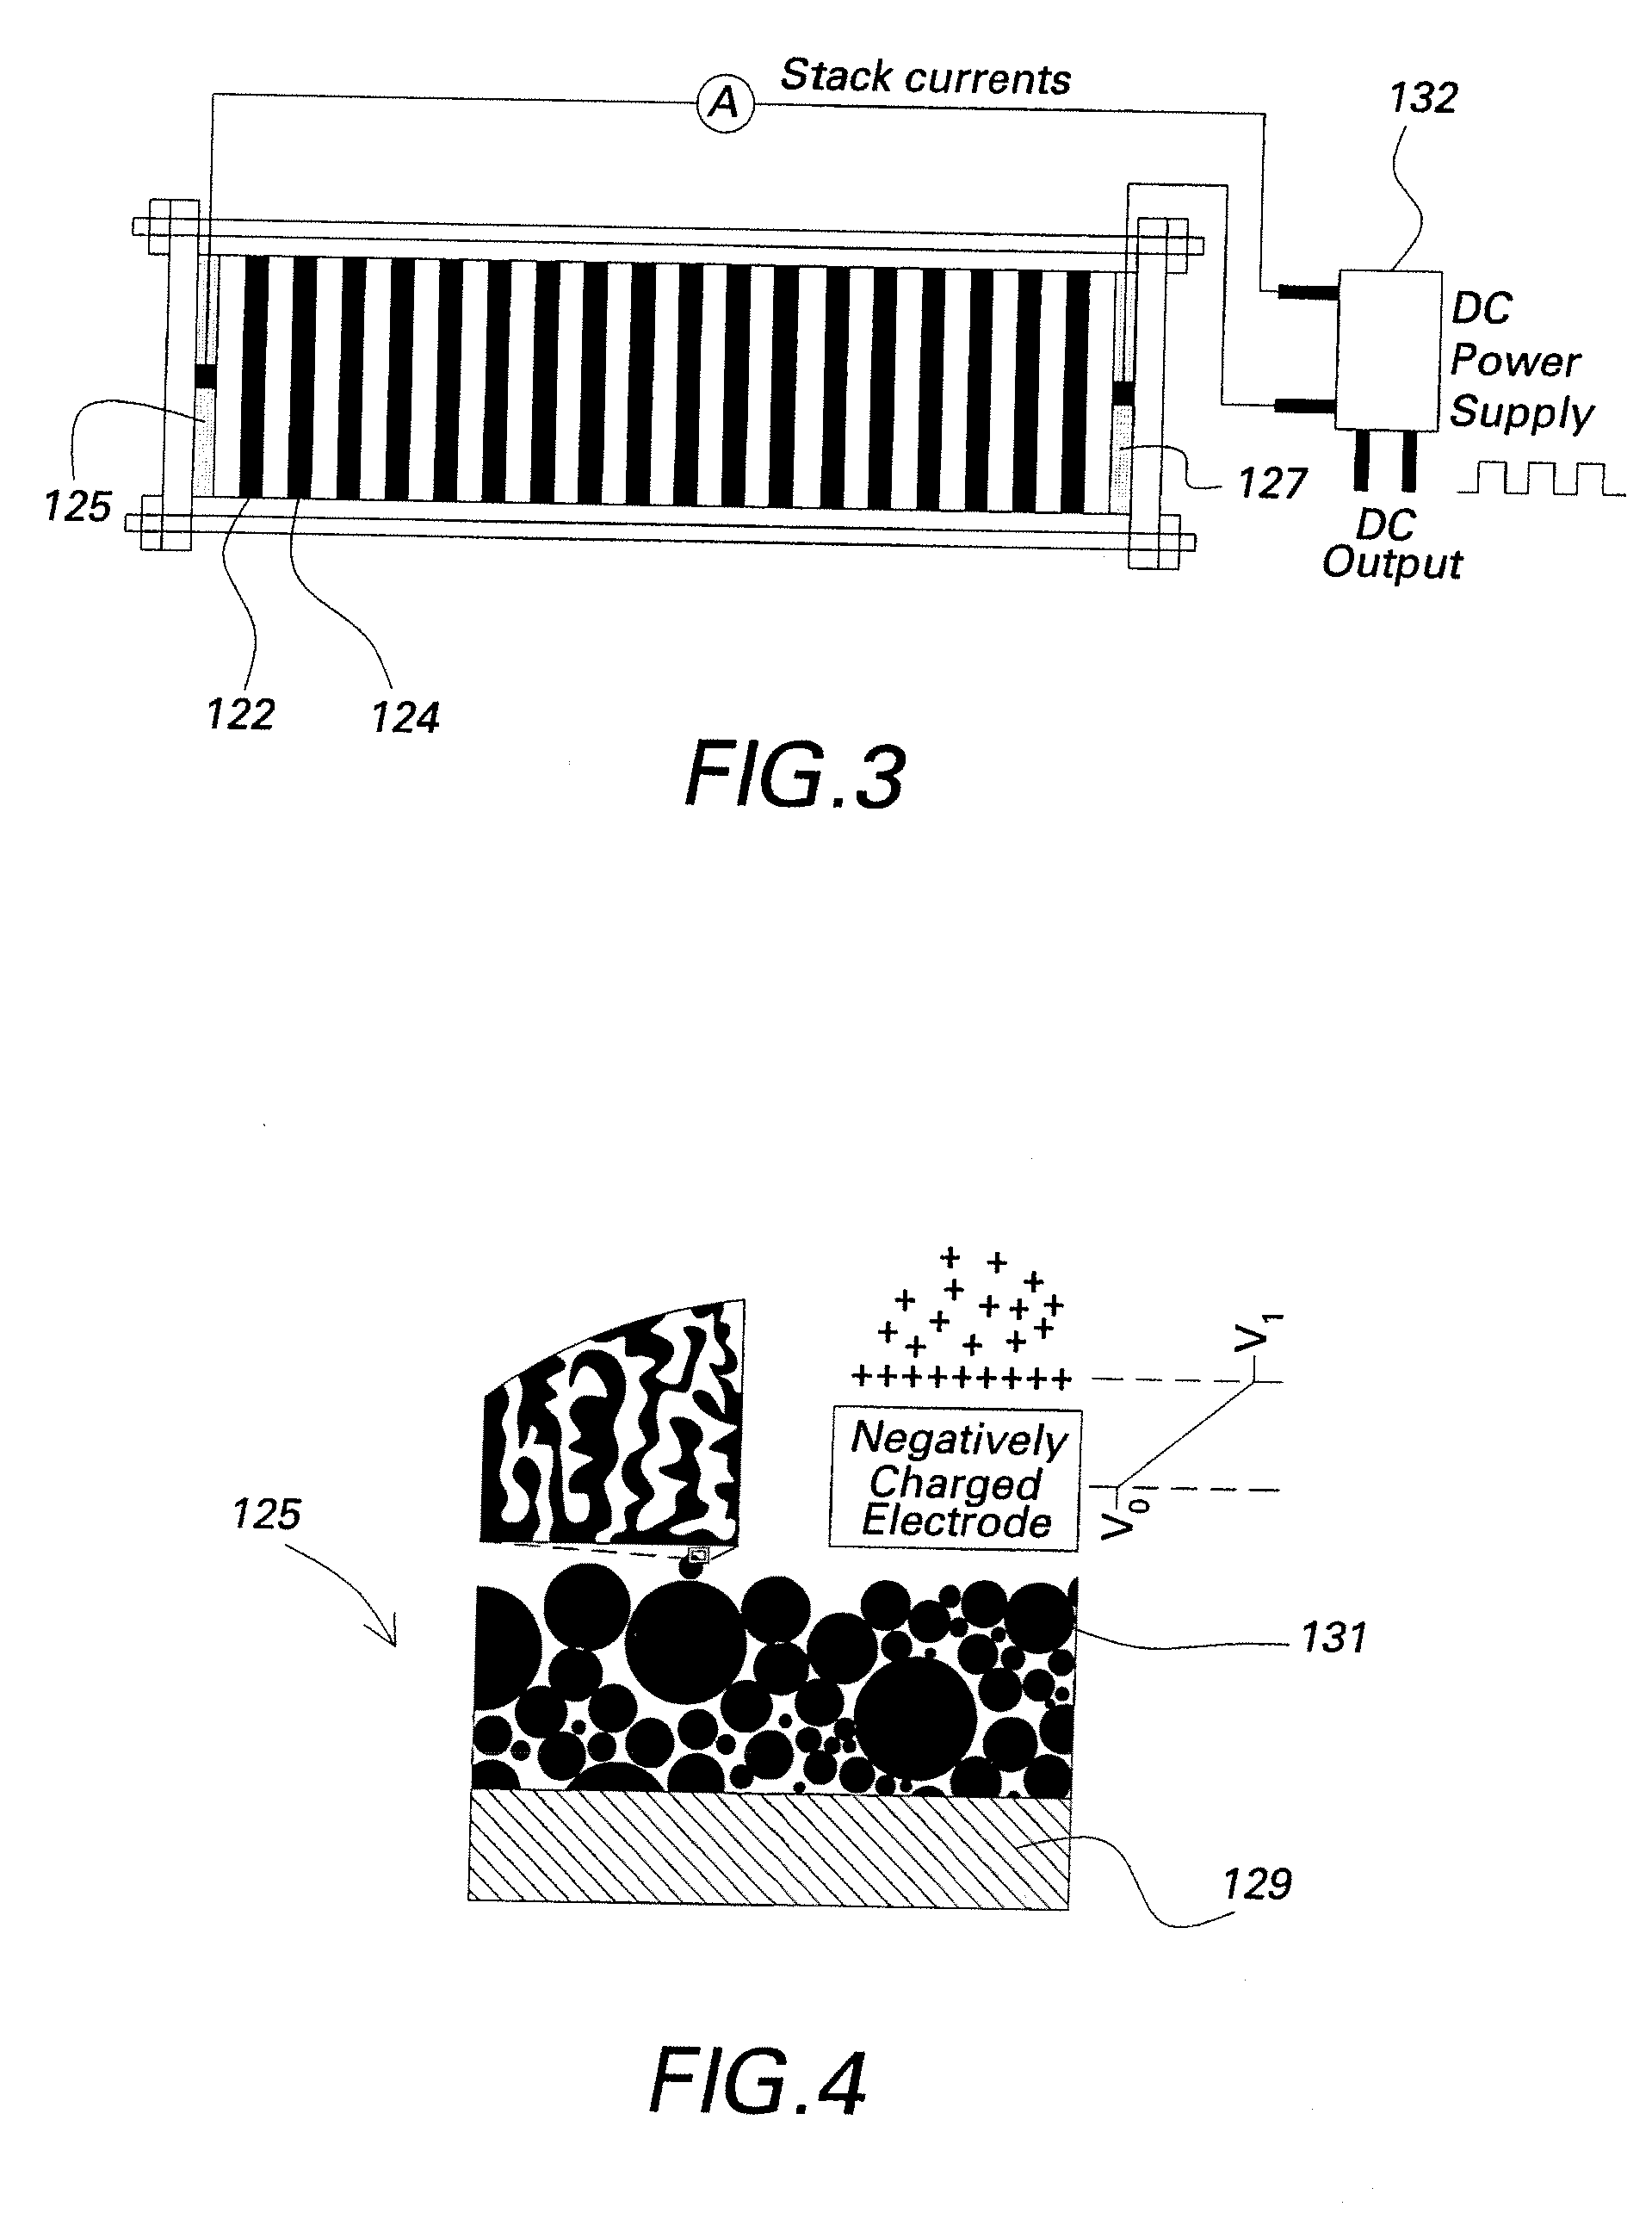 Non-faraday based systems, devices and methods for removing ionic species from liquid